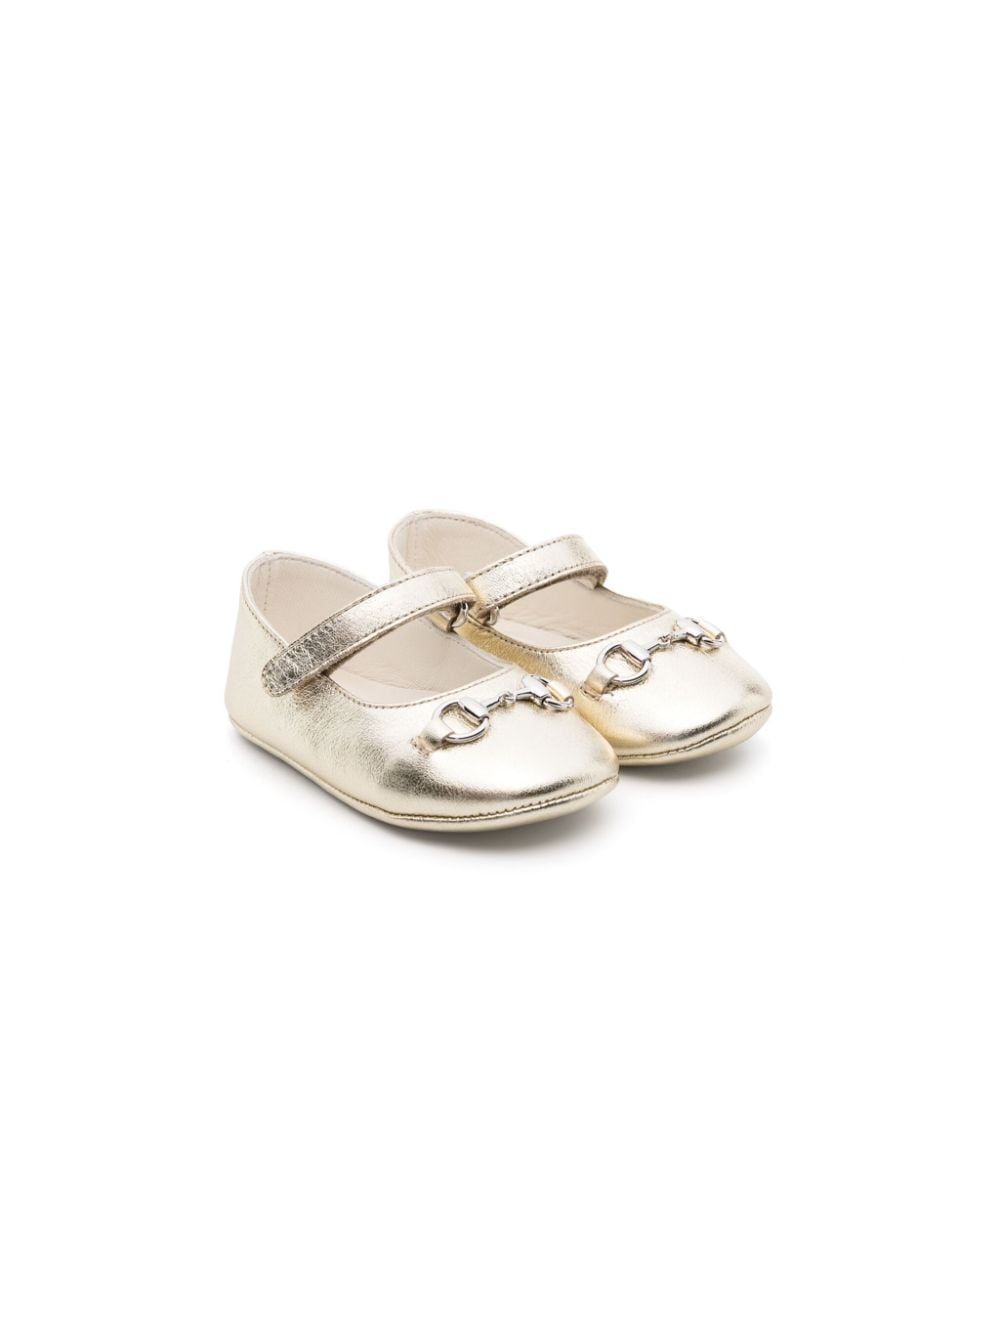 Gucci Babies' Horsebit-detail Leather Ballerina Shoes In Gold